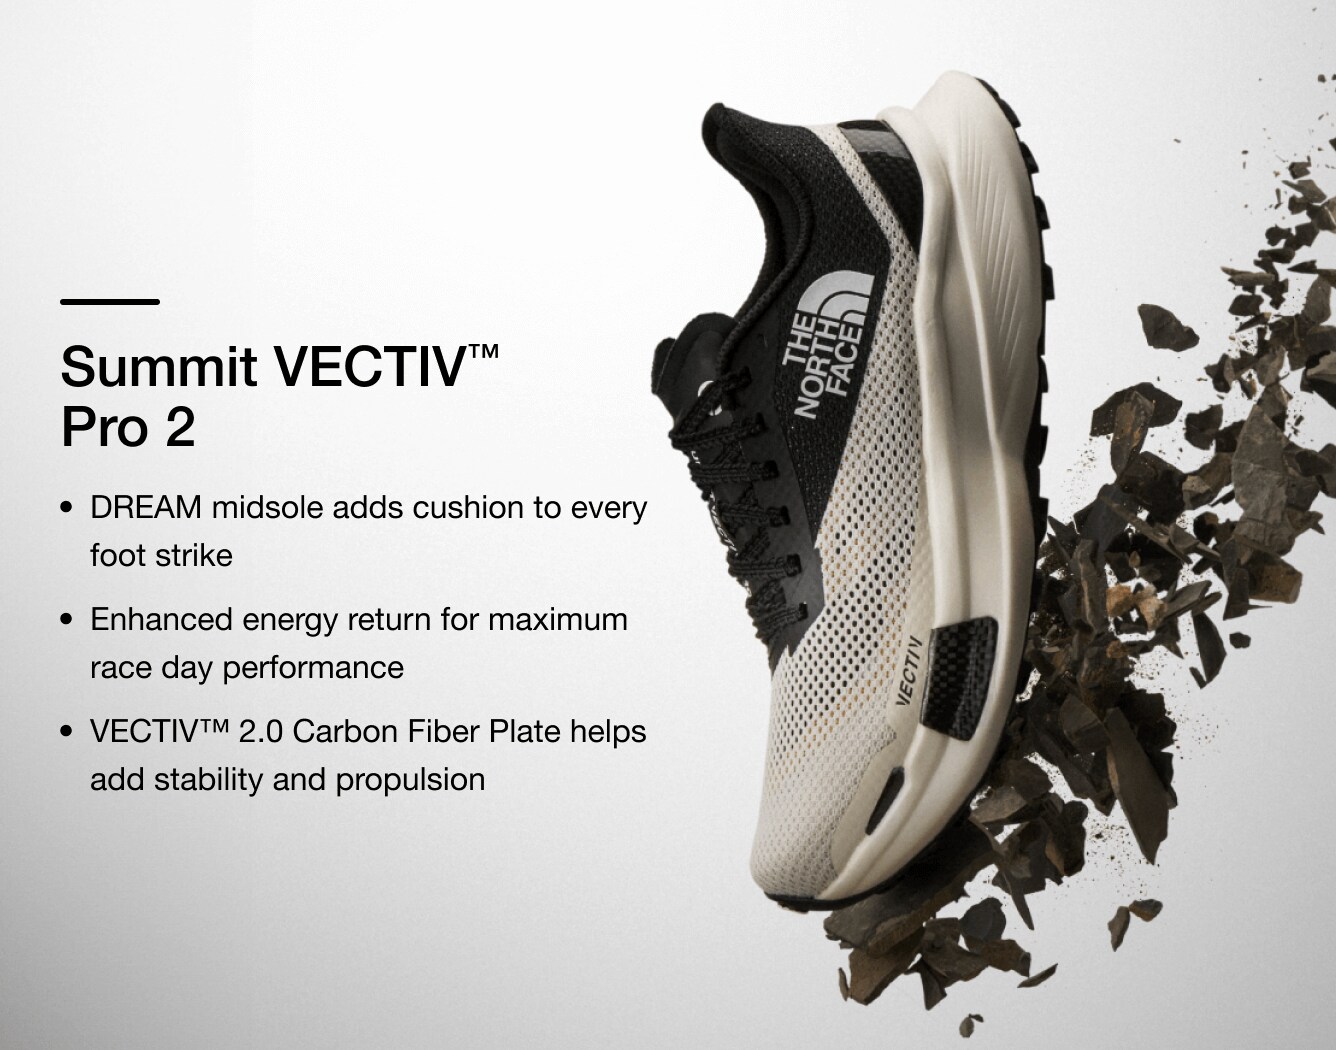 Studio shot of a Summit Series VECTIV Pro shoe with features illustrated via text overlay.